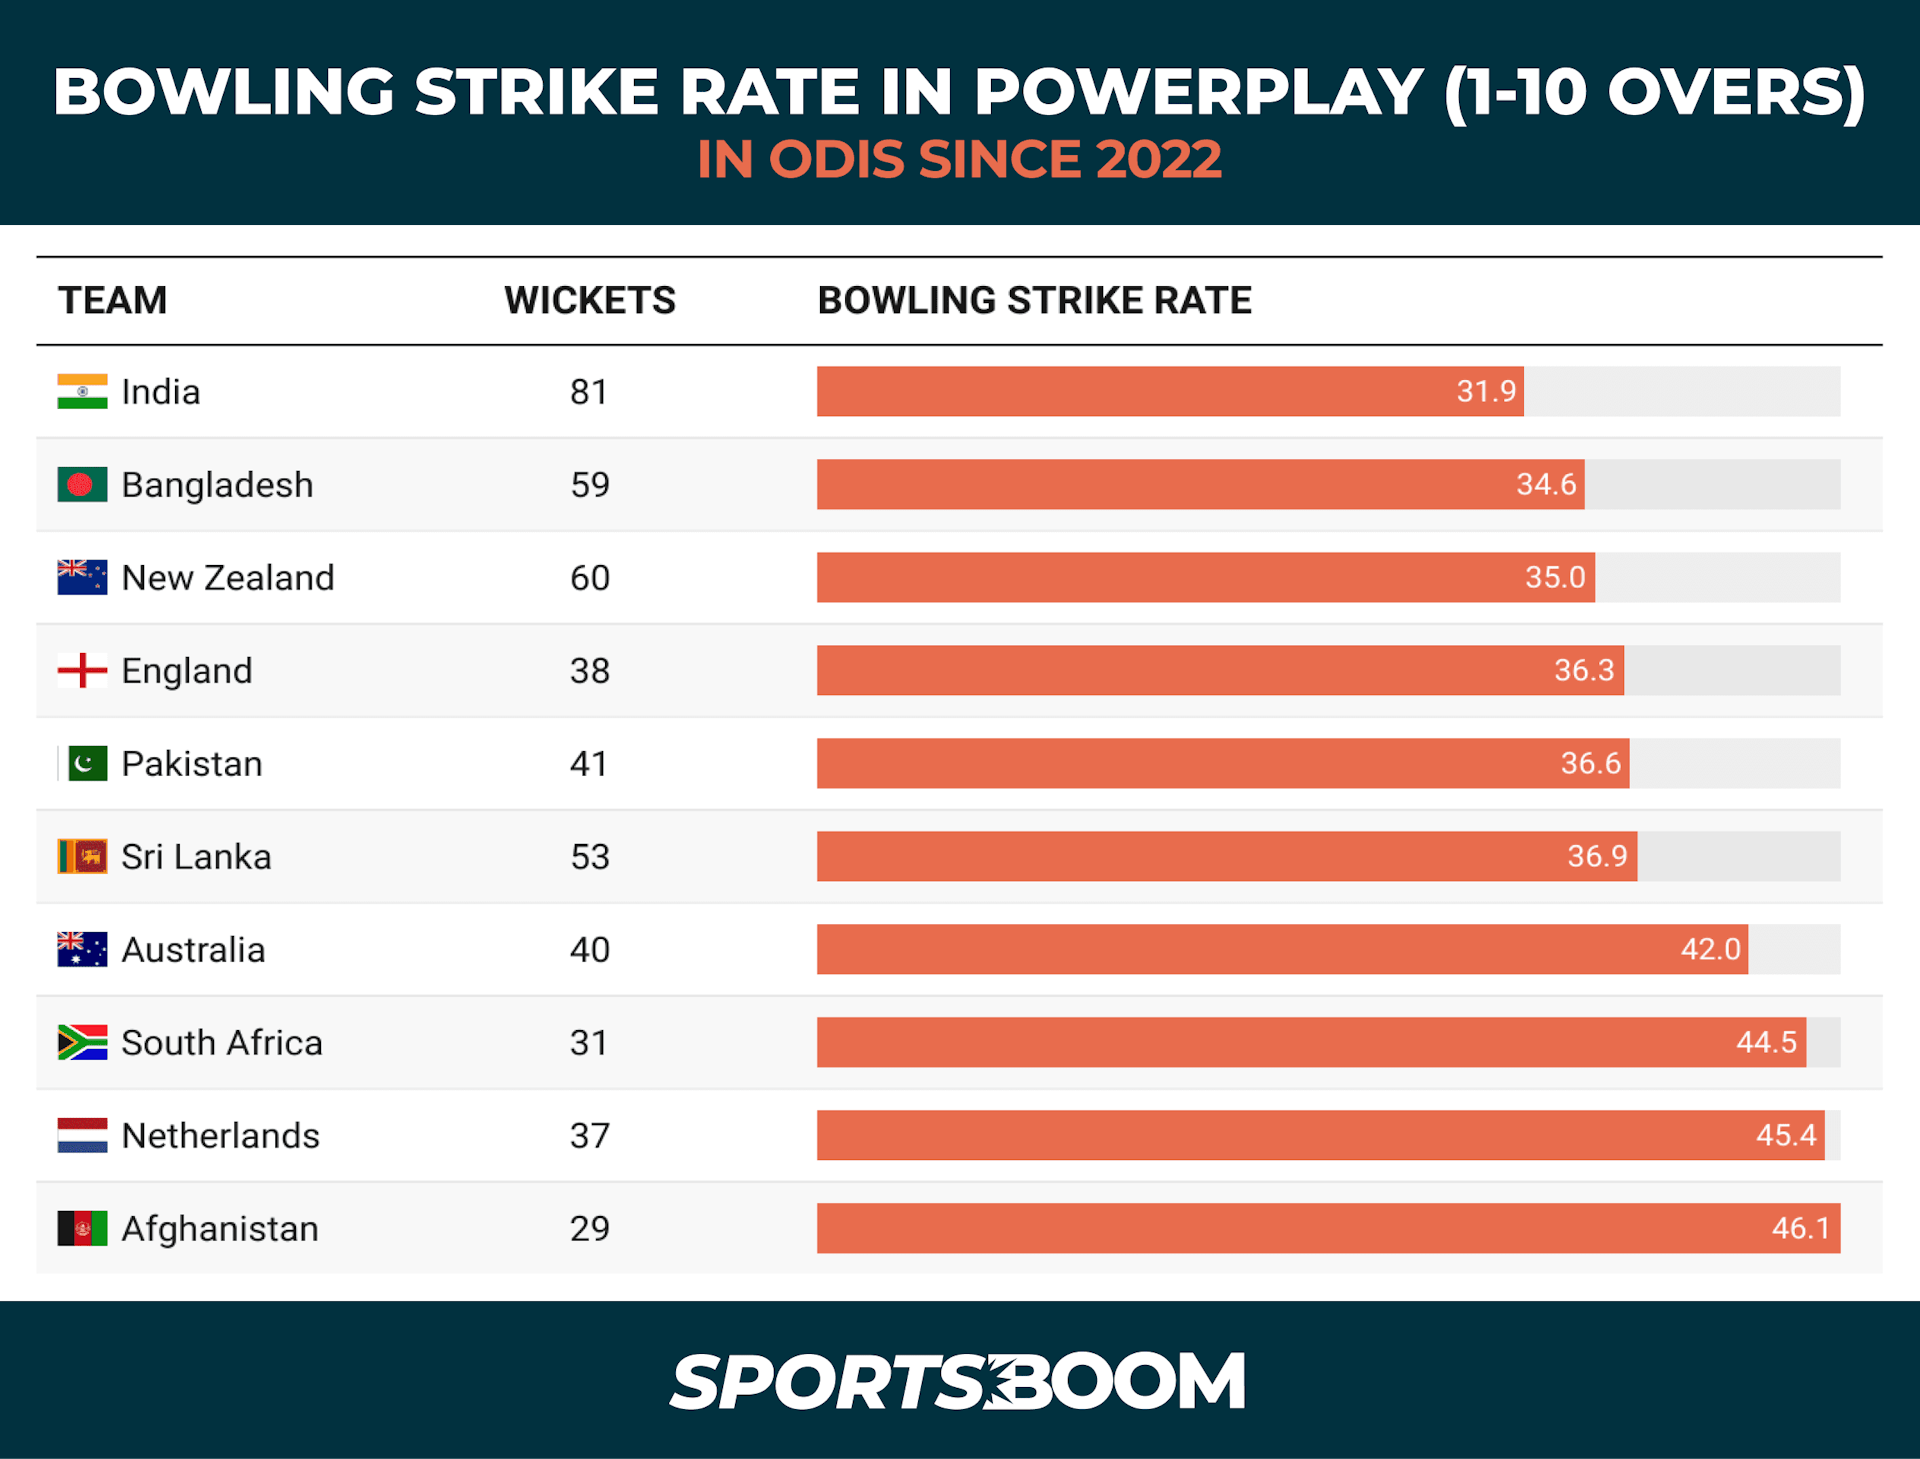 BOWLING STRIKE RATE IN POWER PLAY (1-10) OVERS IN ODIS SINCE 2022.png